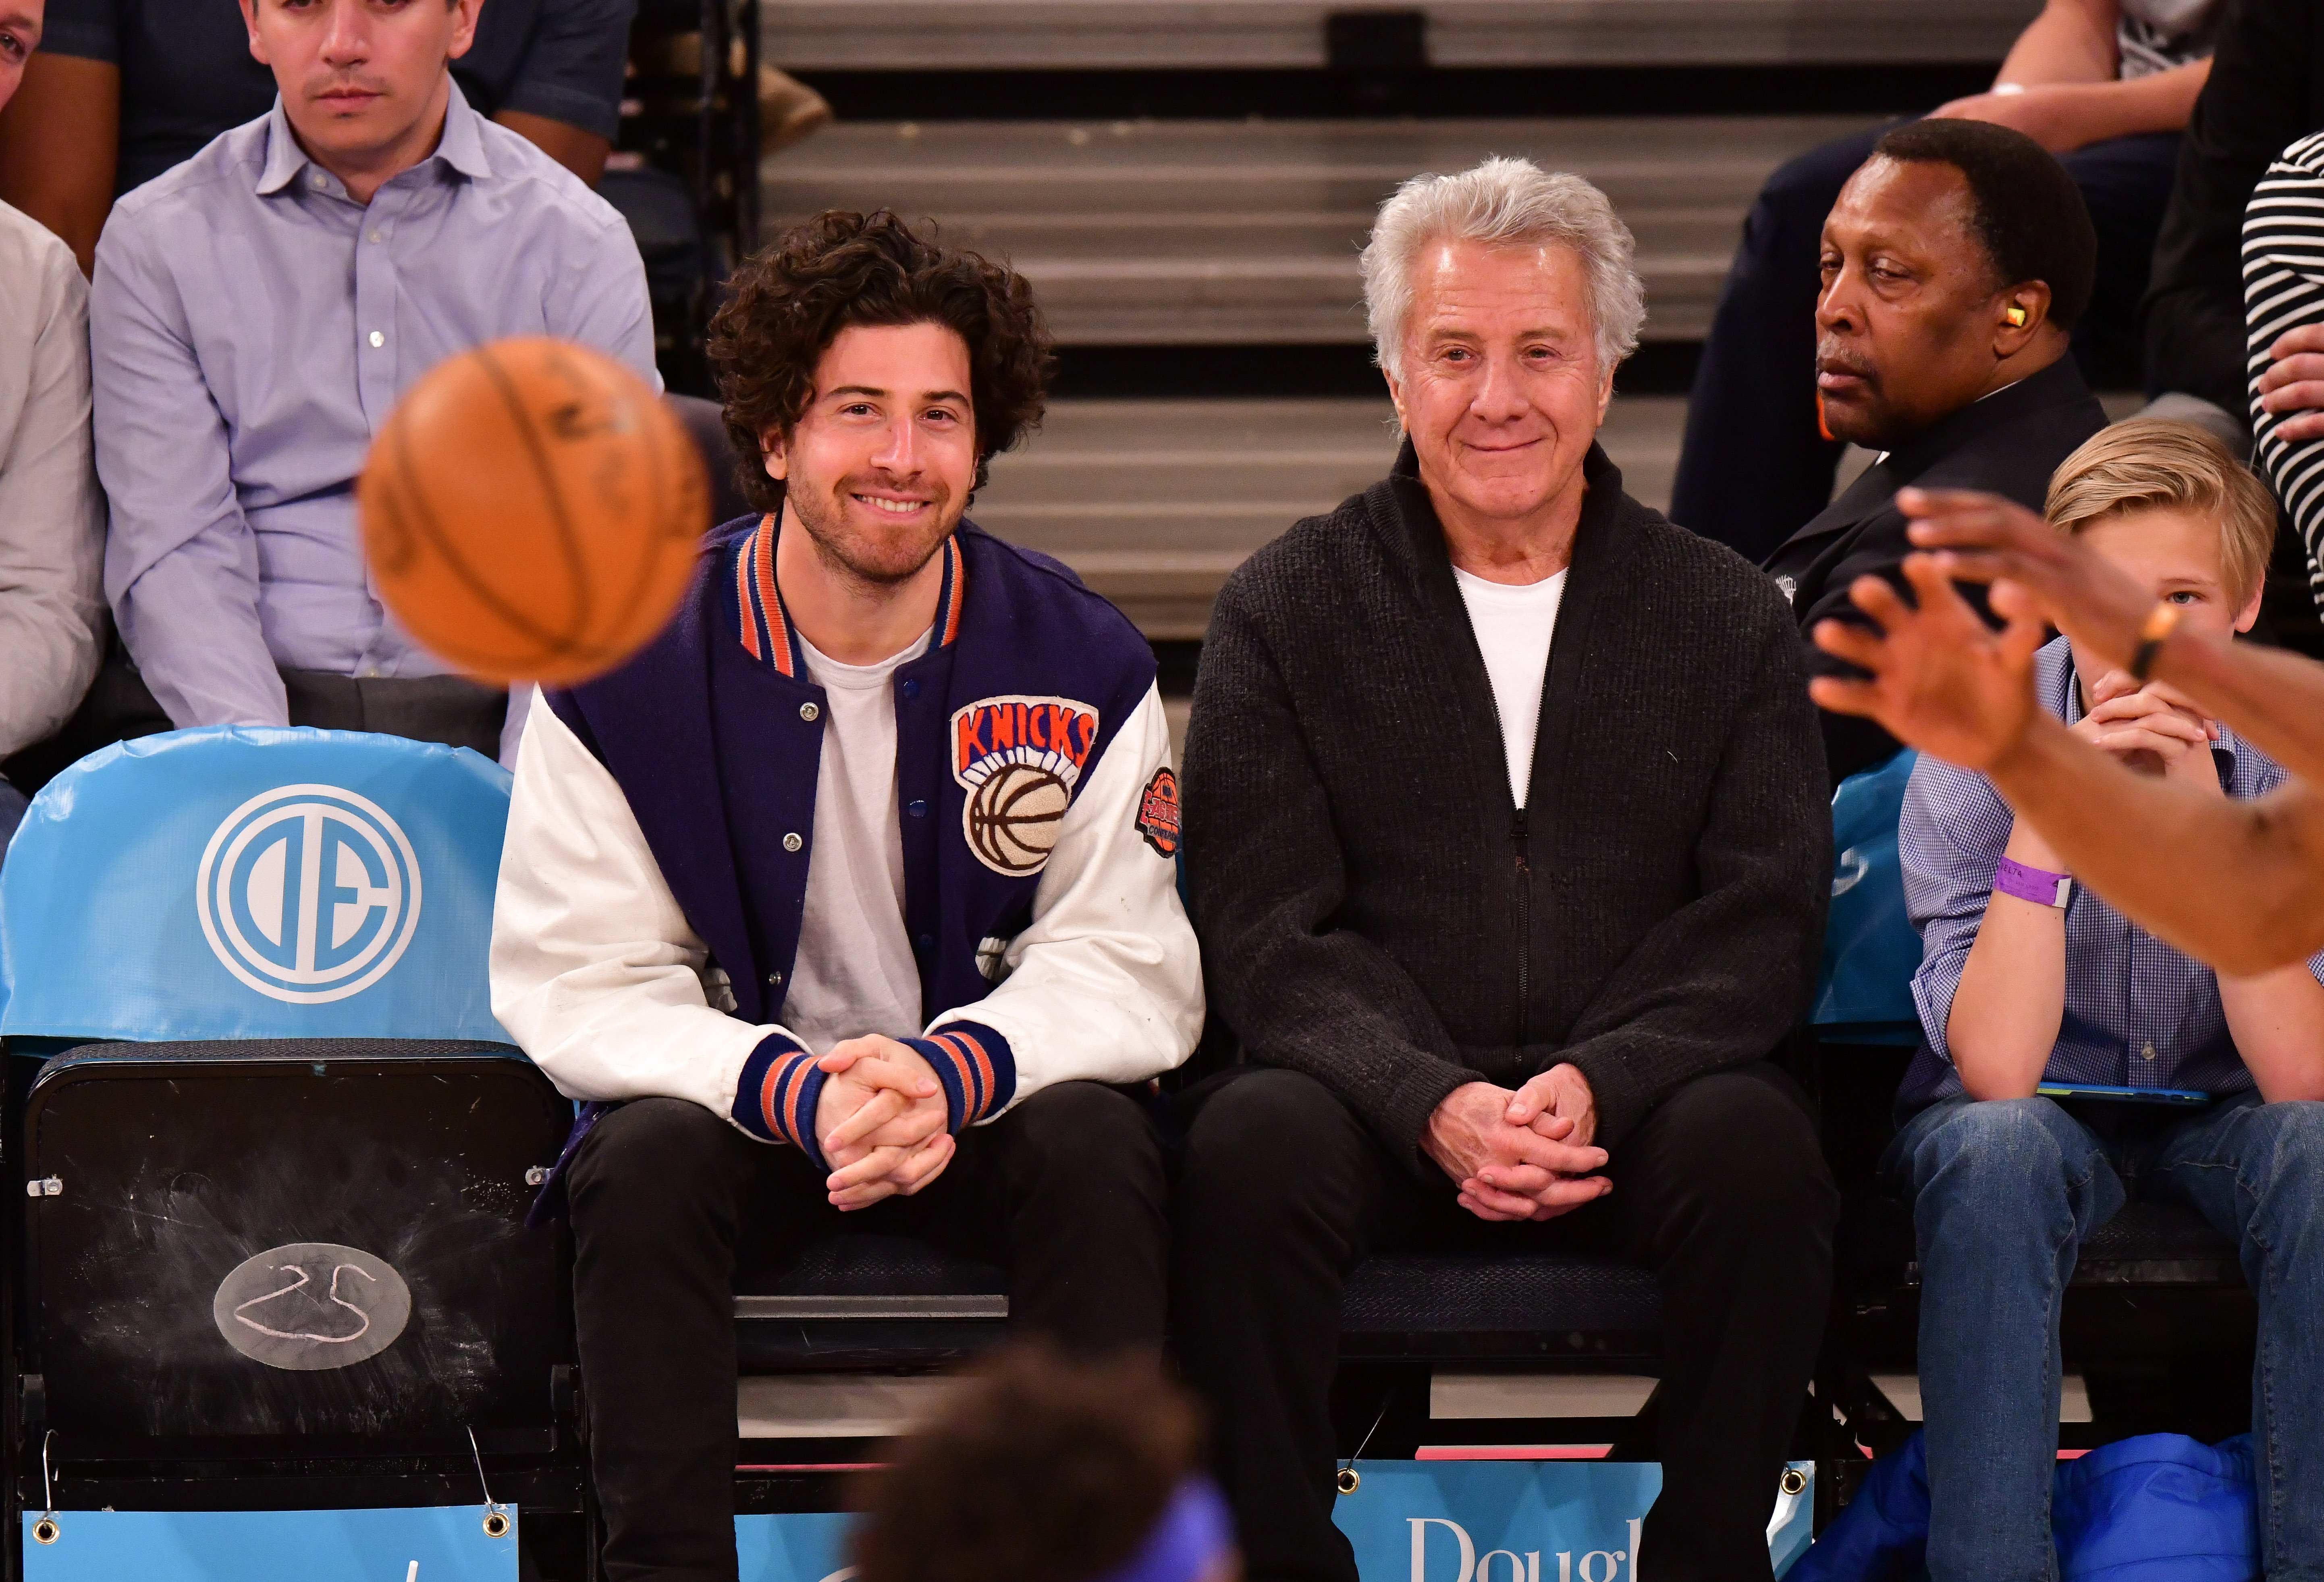 Jake and Dustin Hoffman at the Detroit Pistons v New York Knicks game on April 10, 2019, in New York City | Source: Getty Images